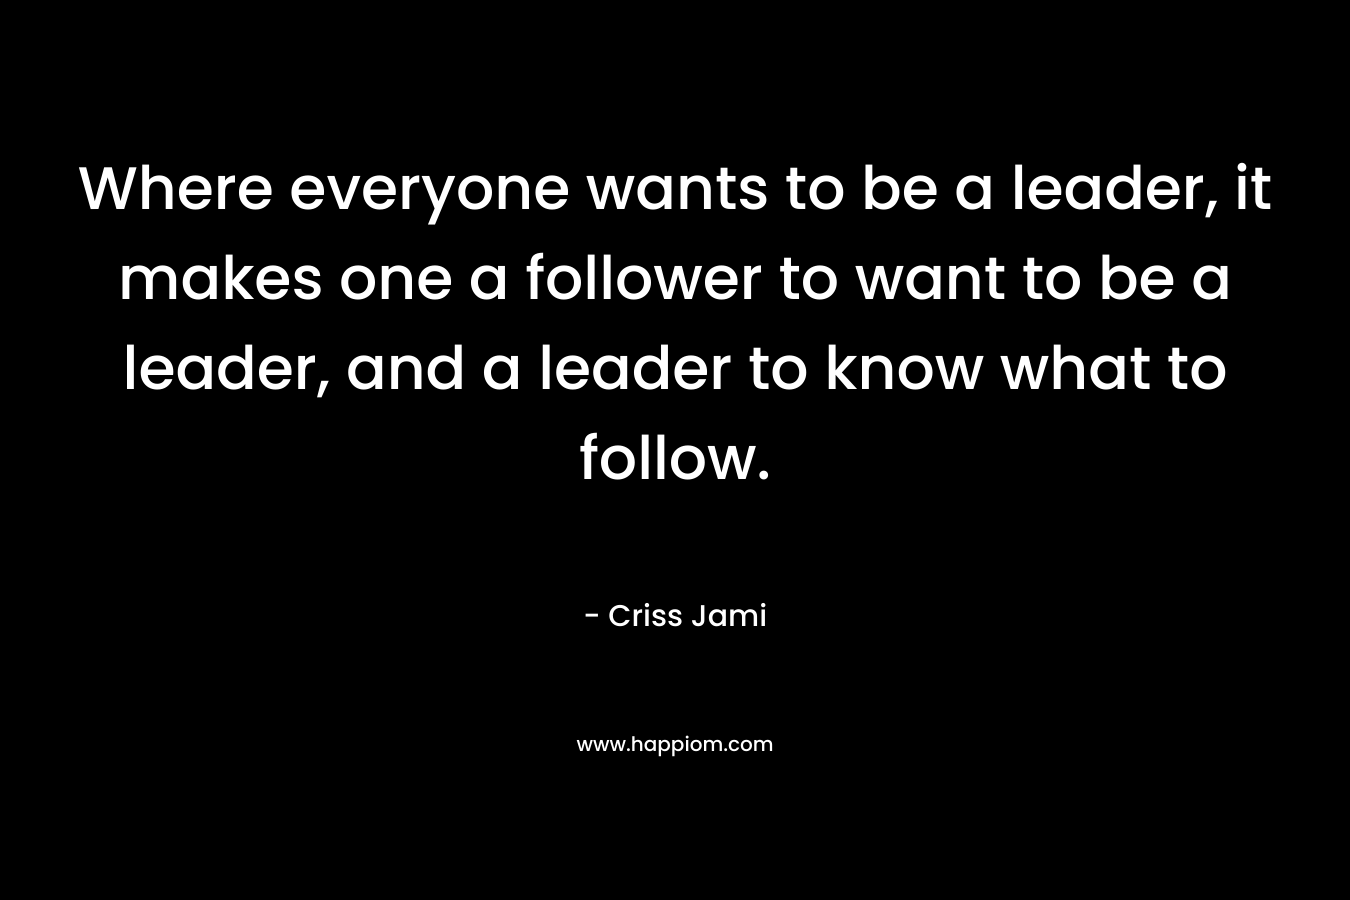 Where everyone wants to be a leader, it makes one a follower to want to be a leader, and a leader to know what to follow.